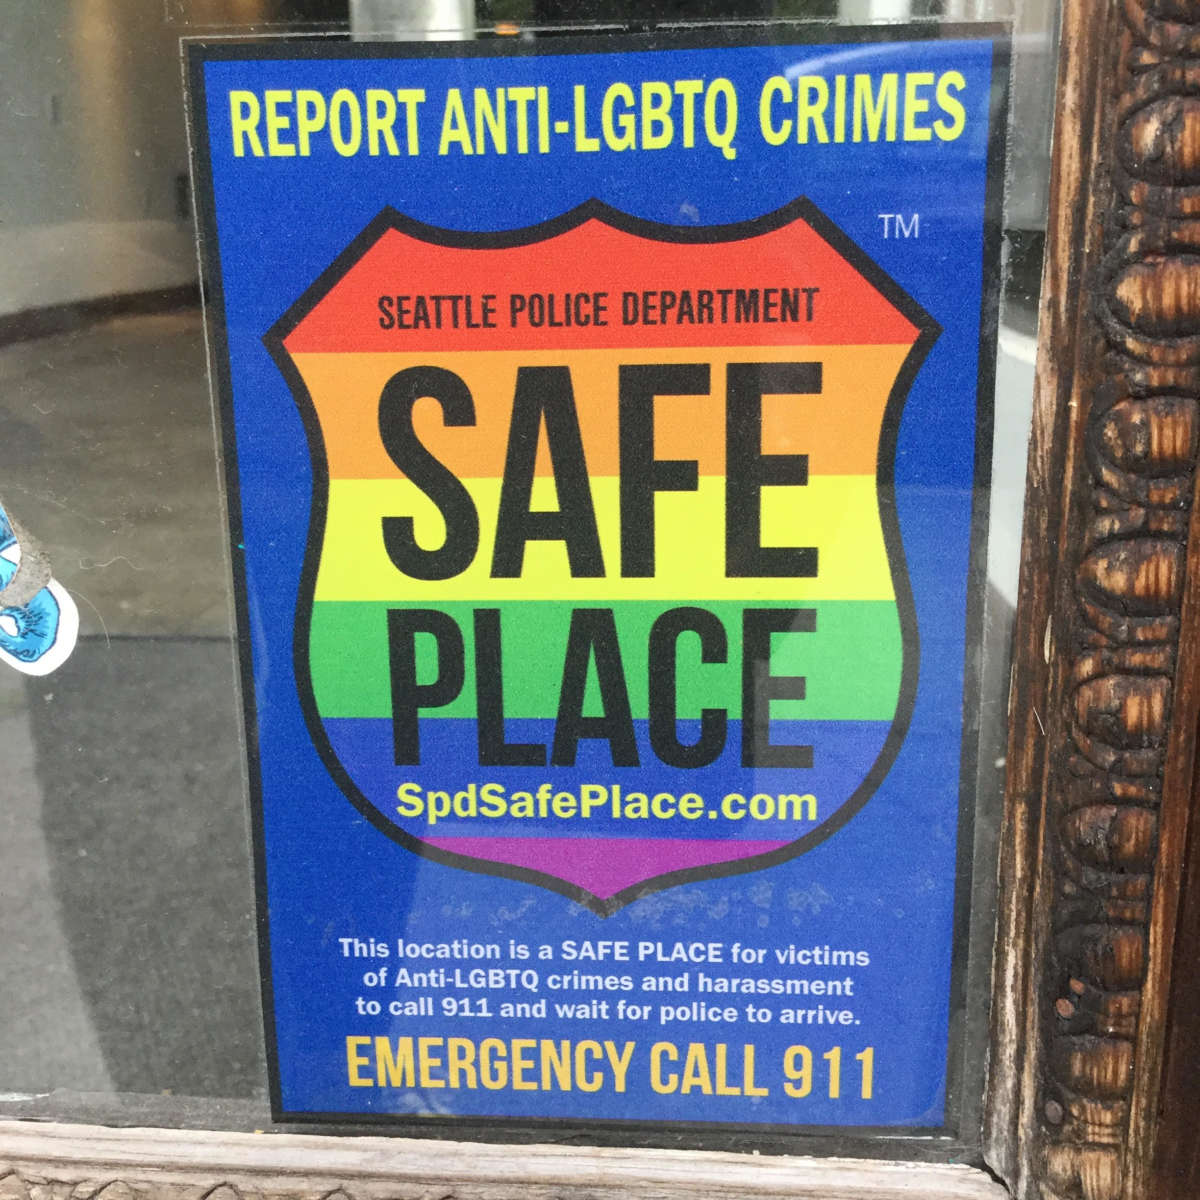 A "Space Place" sticker is seen on the window of a business in Seattle, WA, on June 27, 2020.